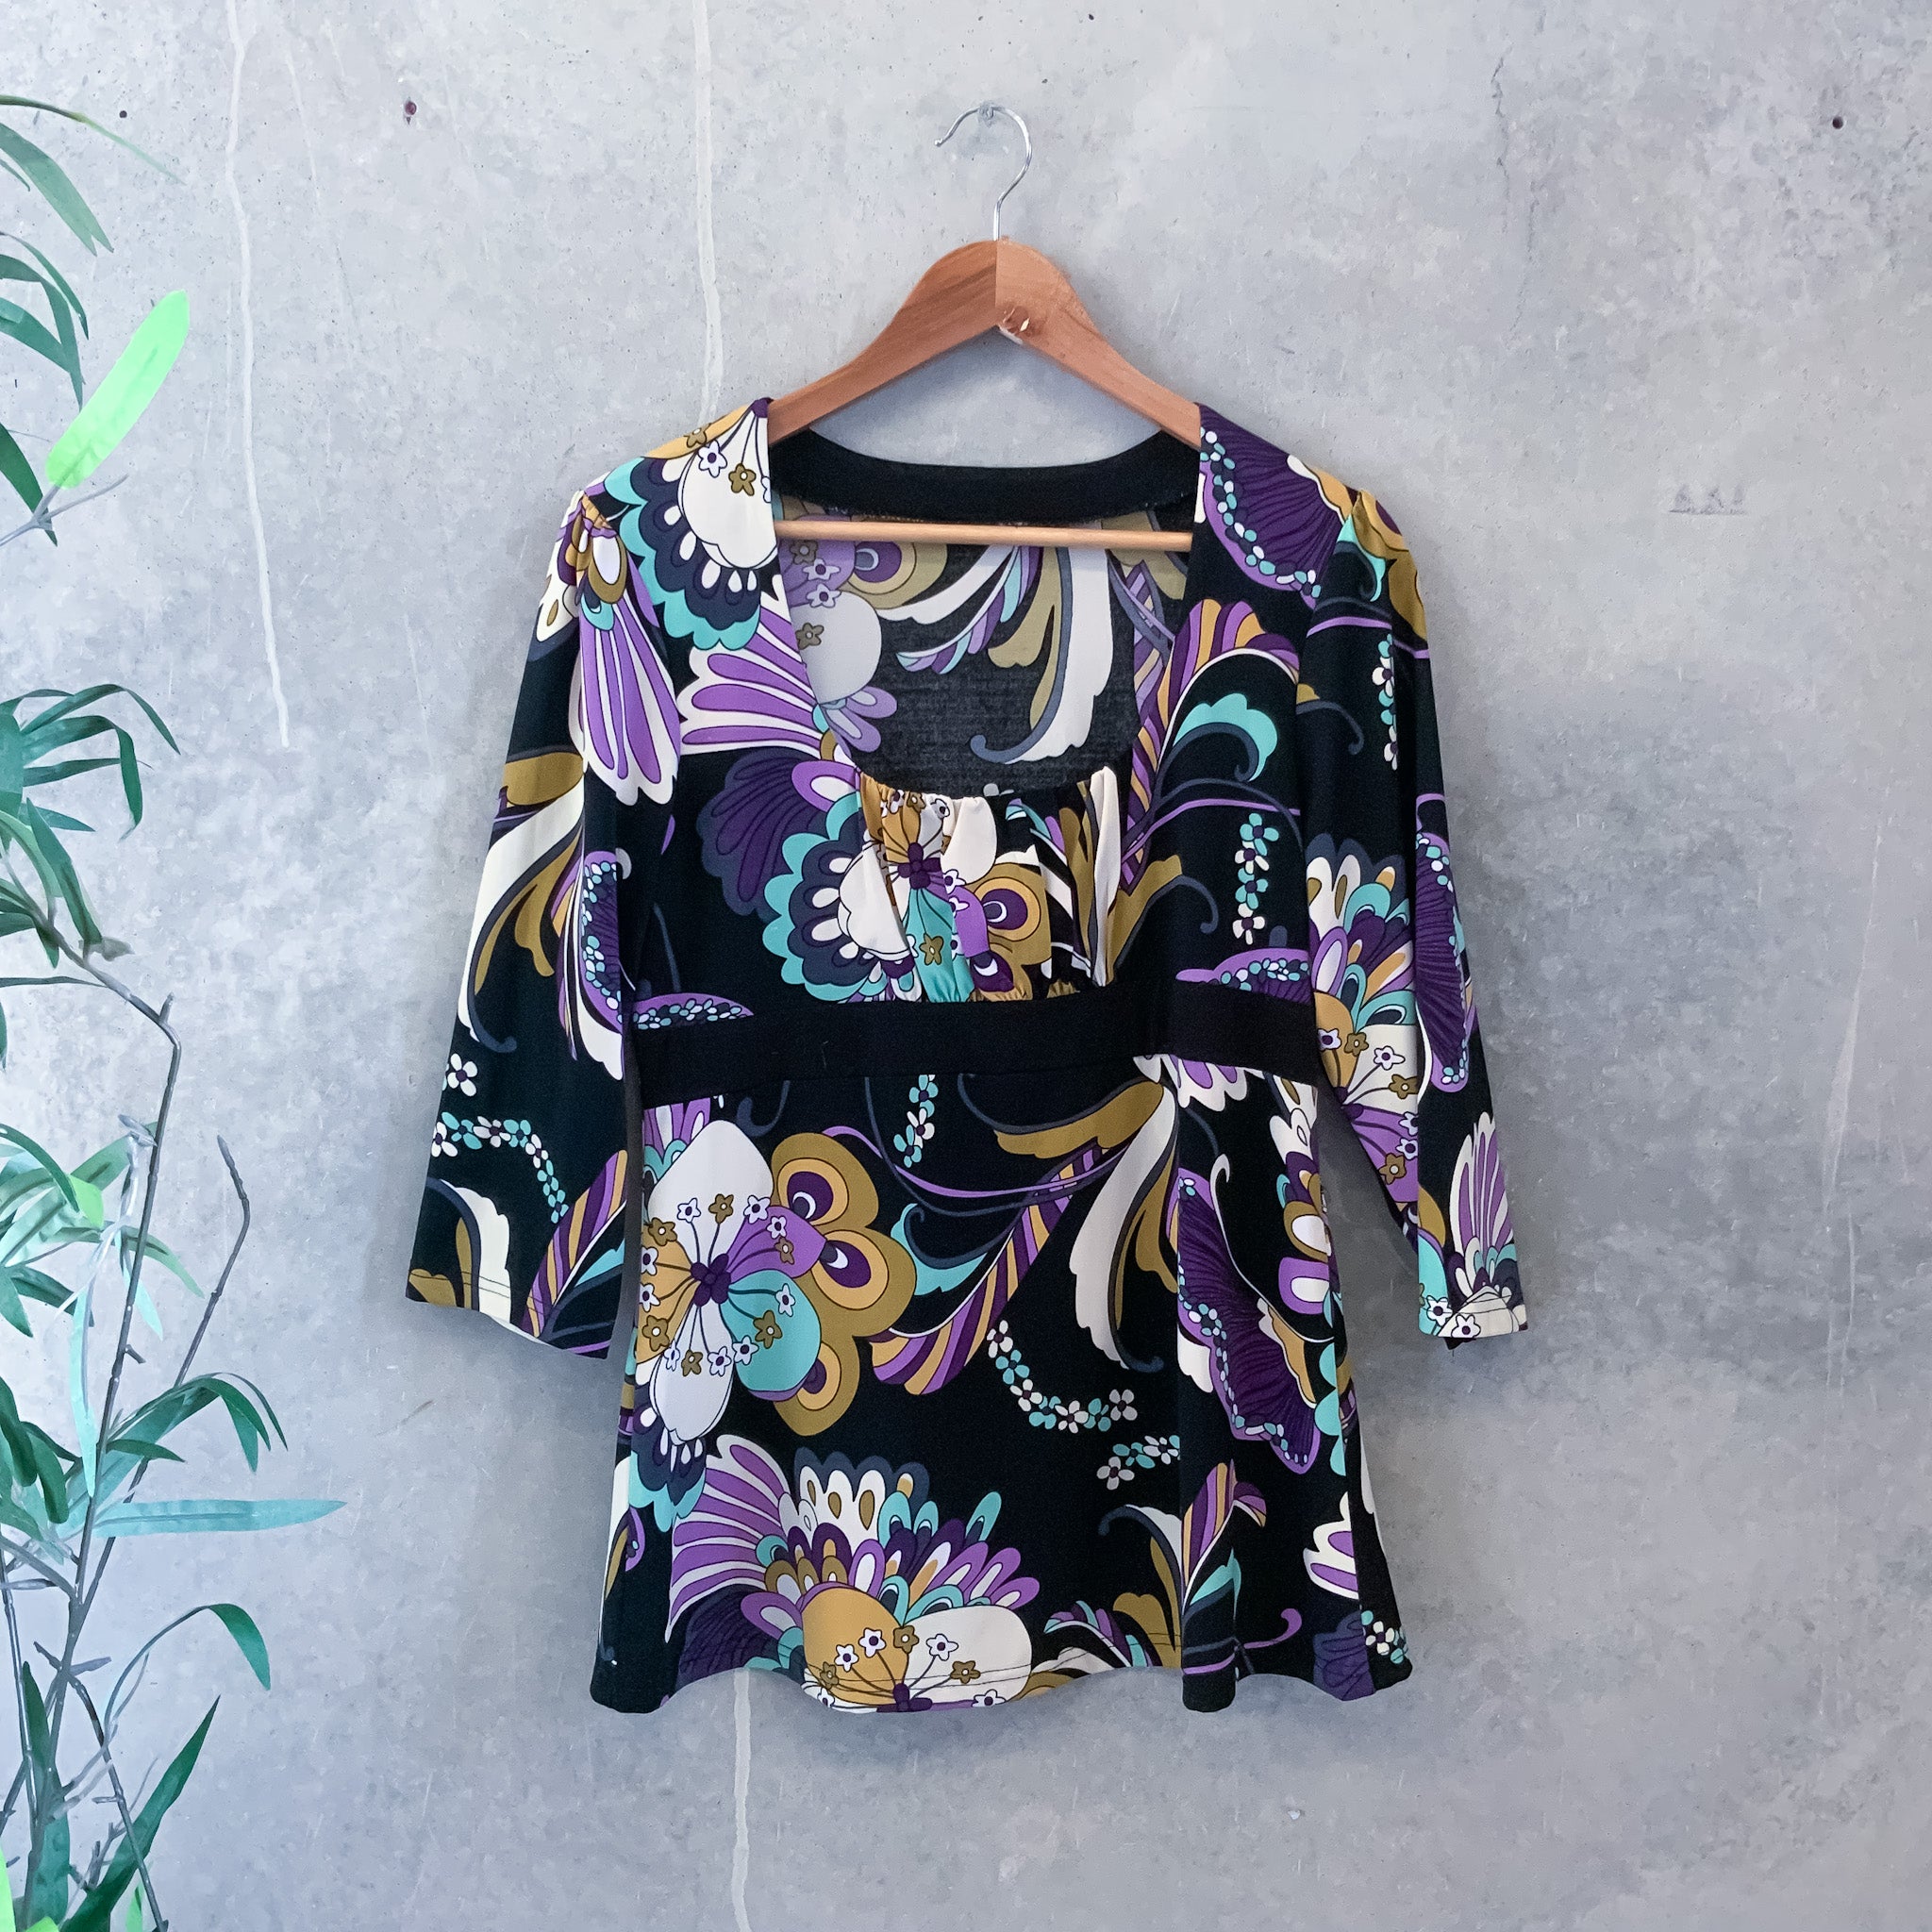 60's Vibe Ladies Black Purple Floral Abstract Print Tunic Blouse - size L